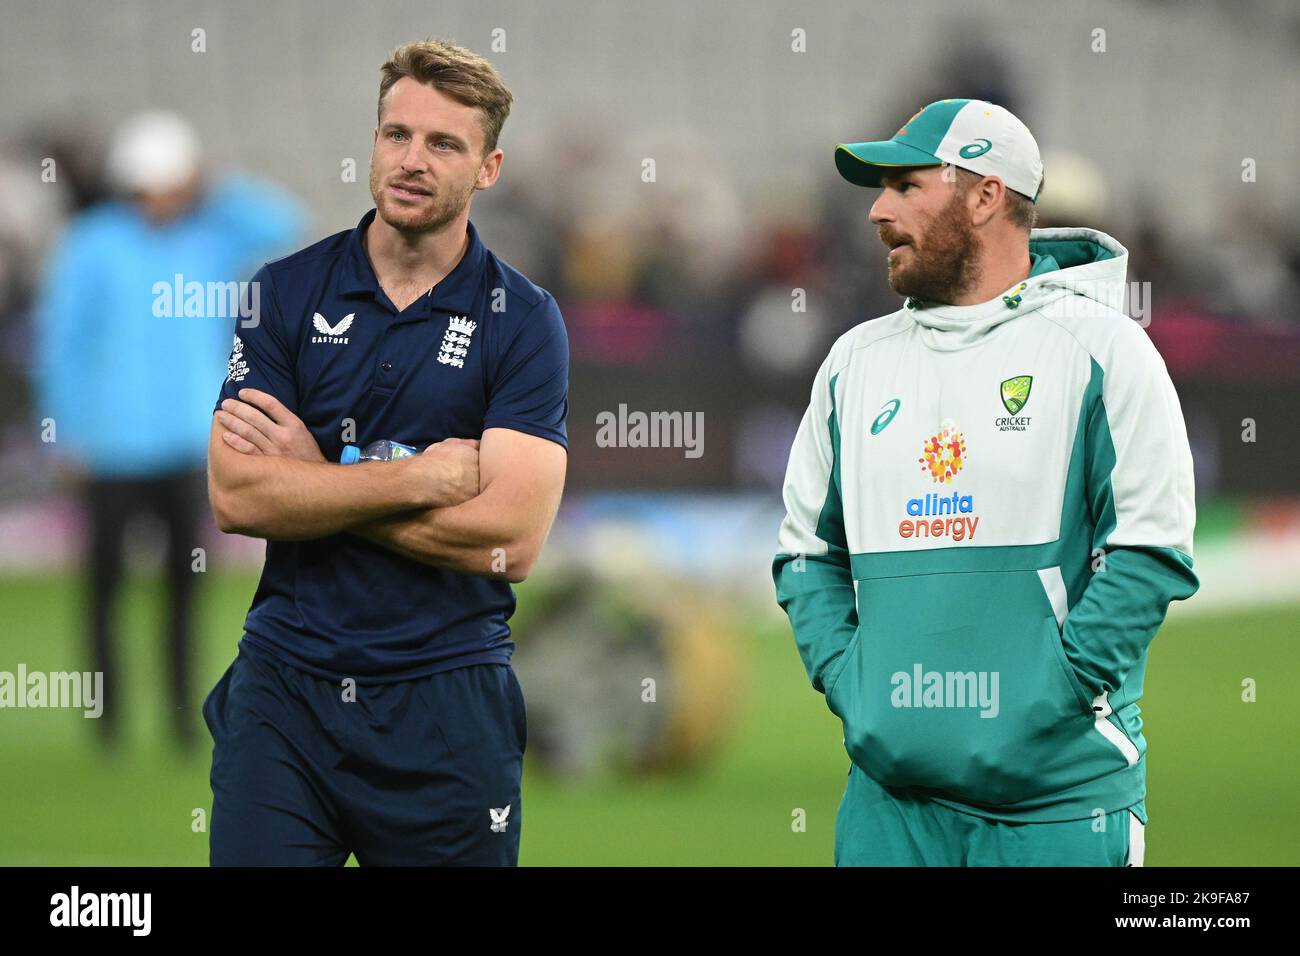 England's Jos Buttler (left) and Australia's Aaron Finch ahead of the T20 World Cup Super 12 match at Melbourne Cricket Ground in Melbourne, Australia. Picture date: Friday October 28, 2022. Stock Photo